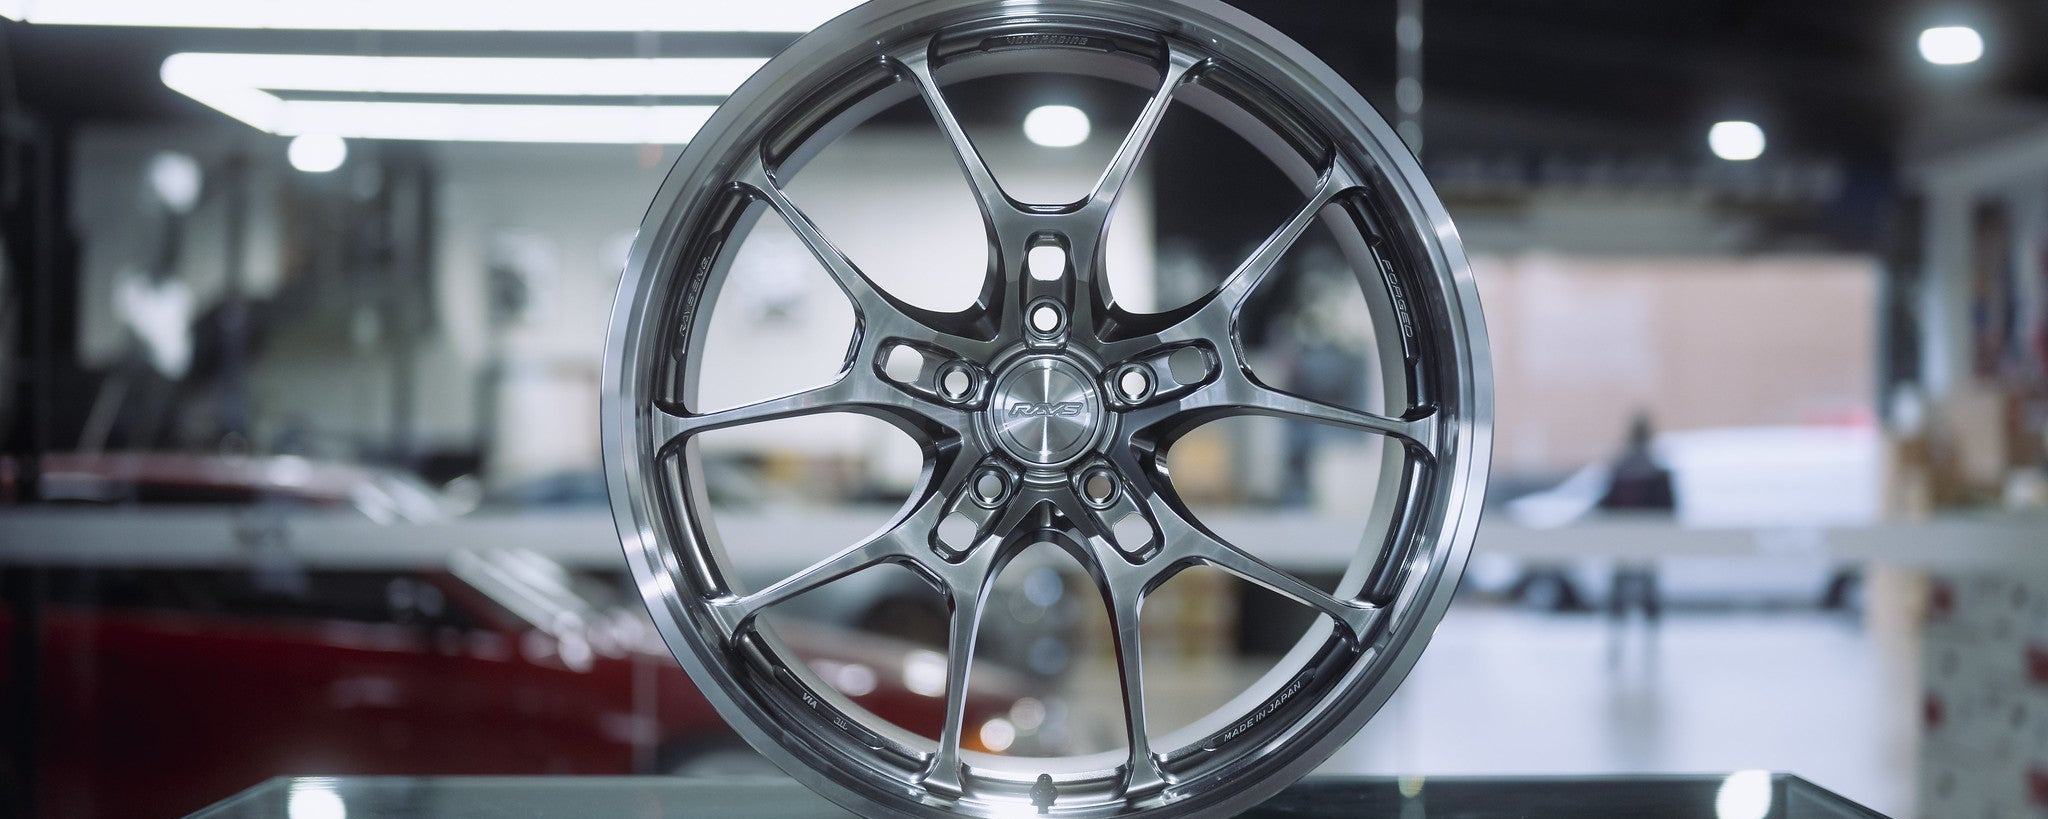 Volk Racing G025LC - Premium Wheels from Volk Racing - From just $5990.0! Shop now at MK MOTORSPORTS